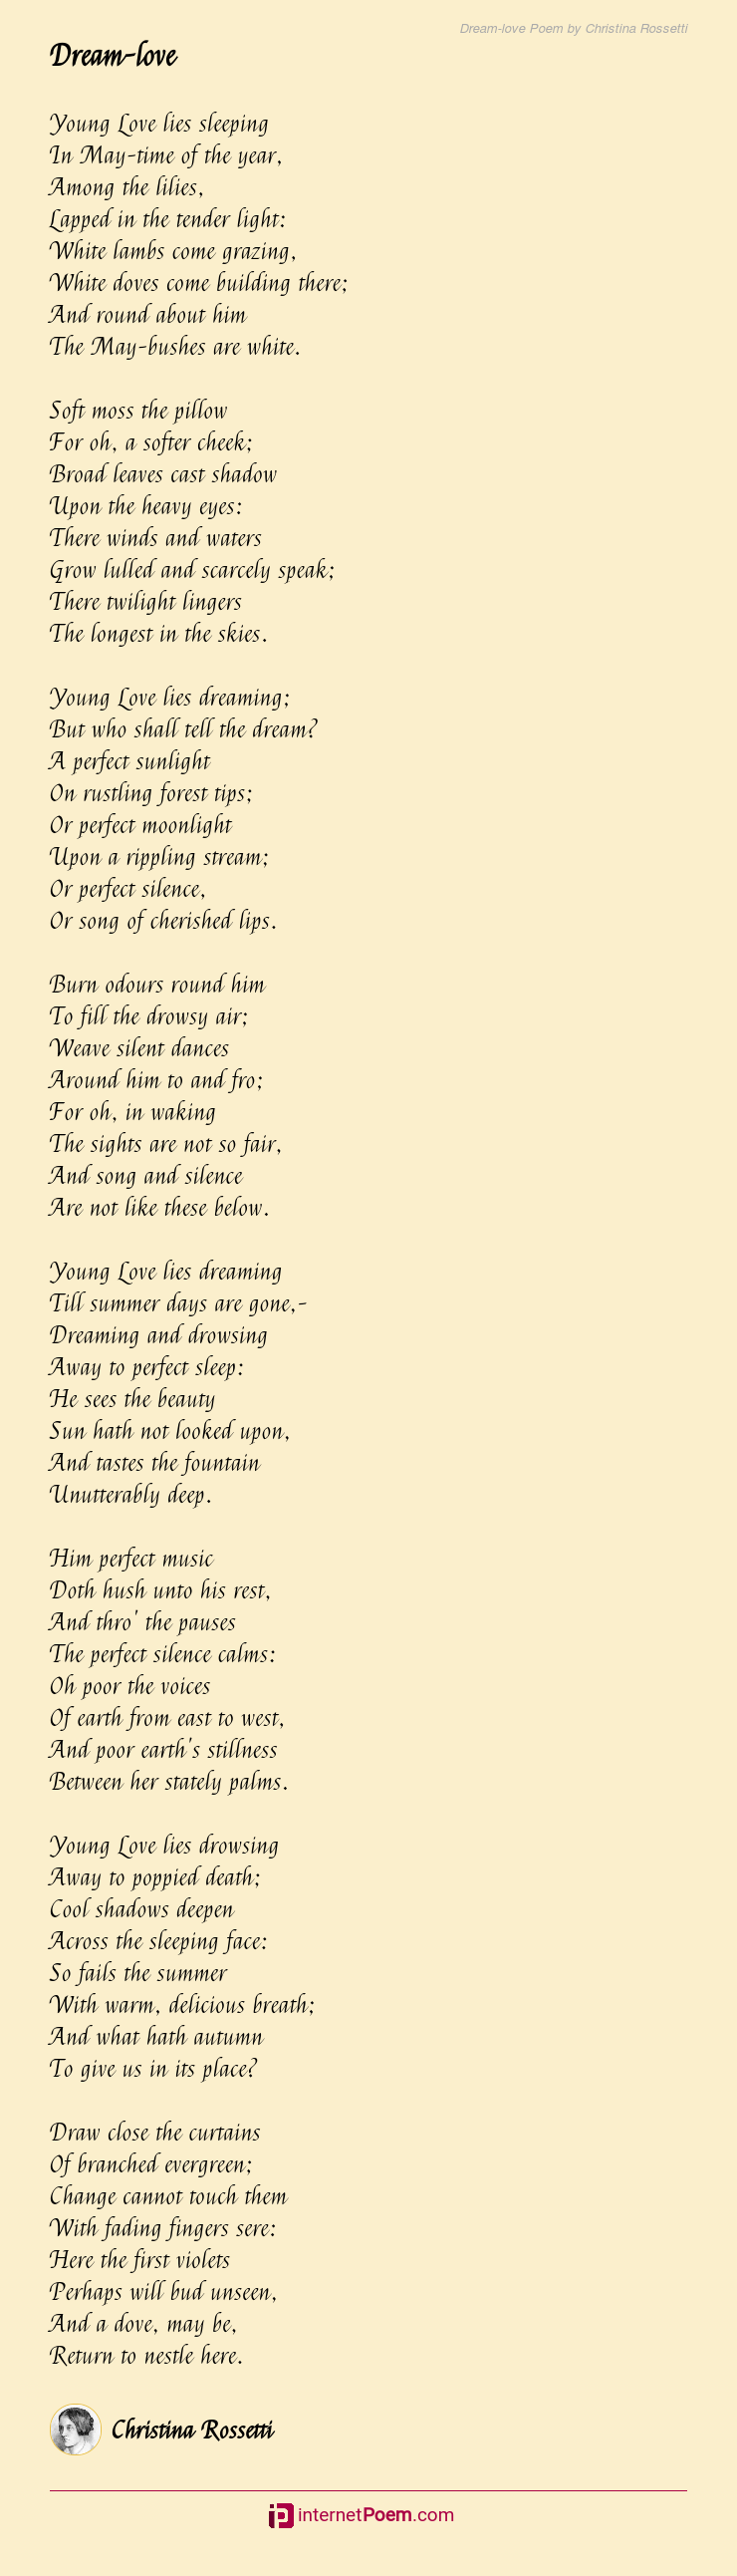 About of her dreaming poems phillis wheatley